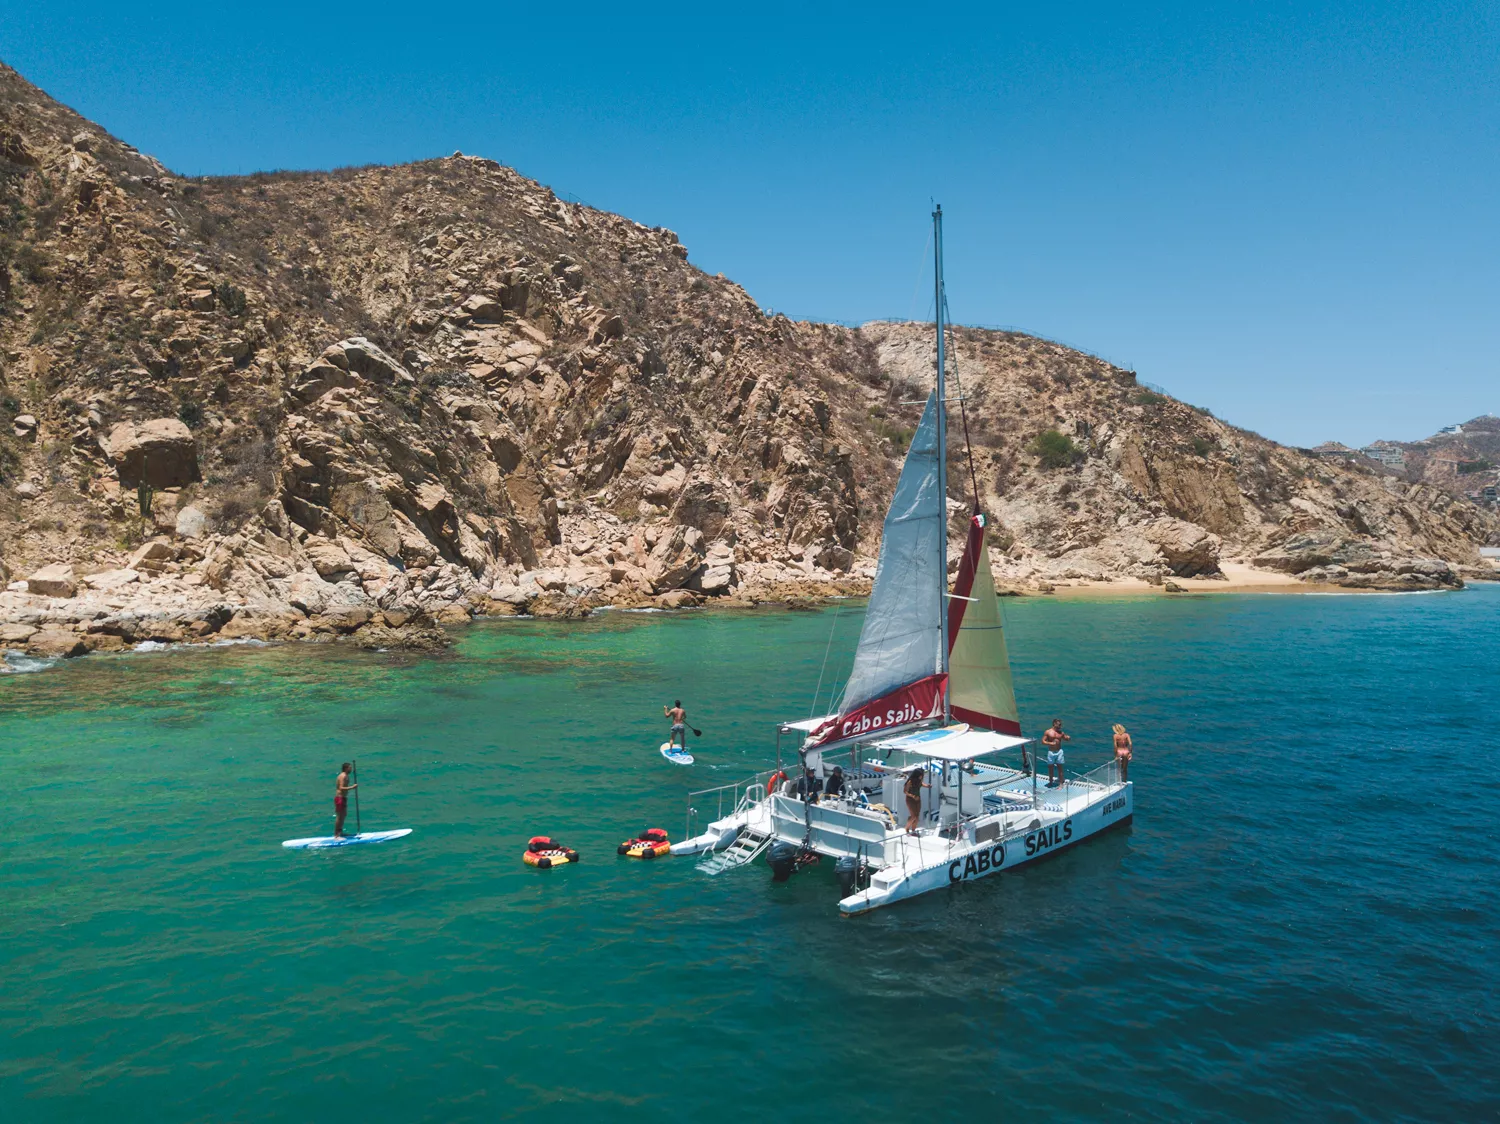 Cabo Sails Sailing Charters and Tours in Mexico, North America | Excursions - Rated 4.2